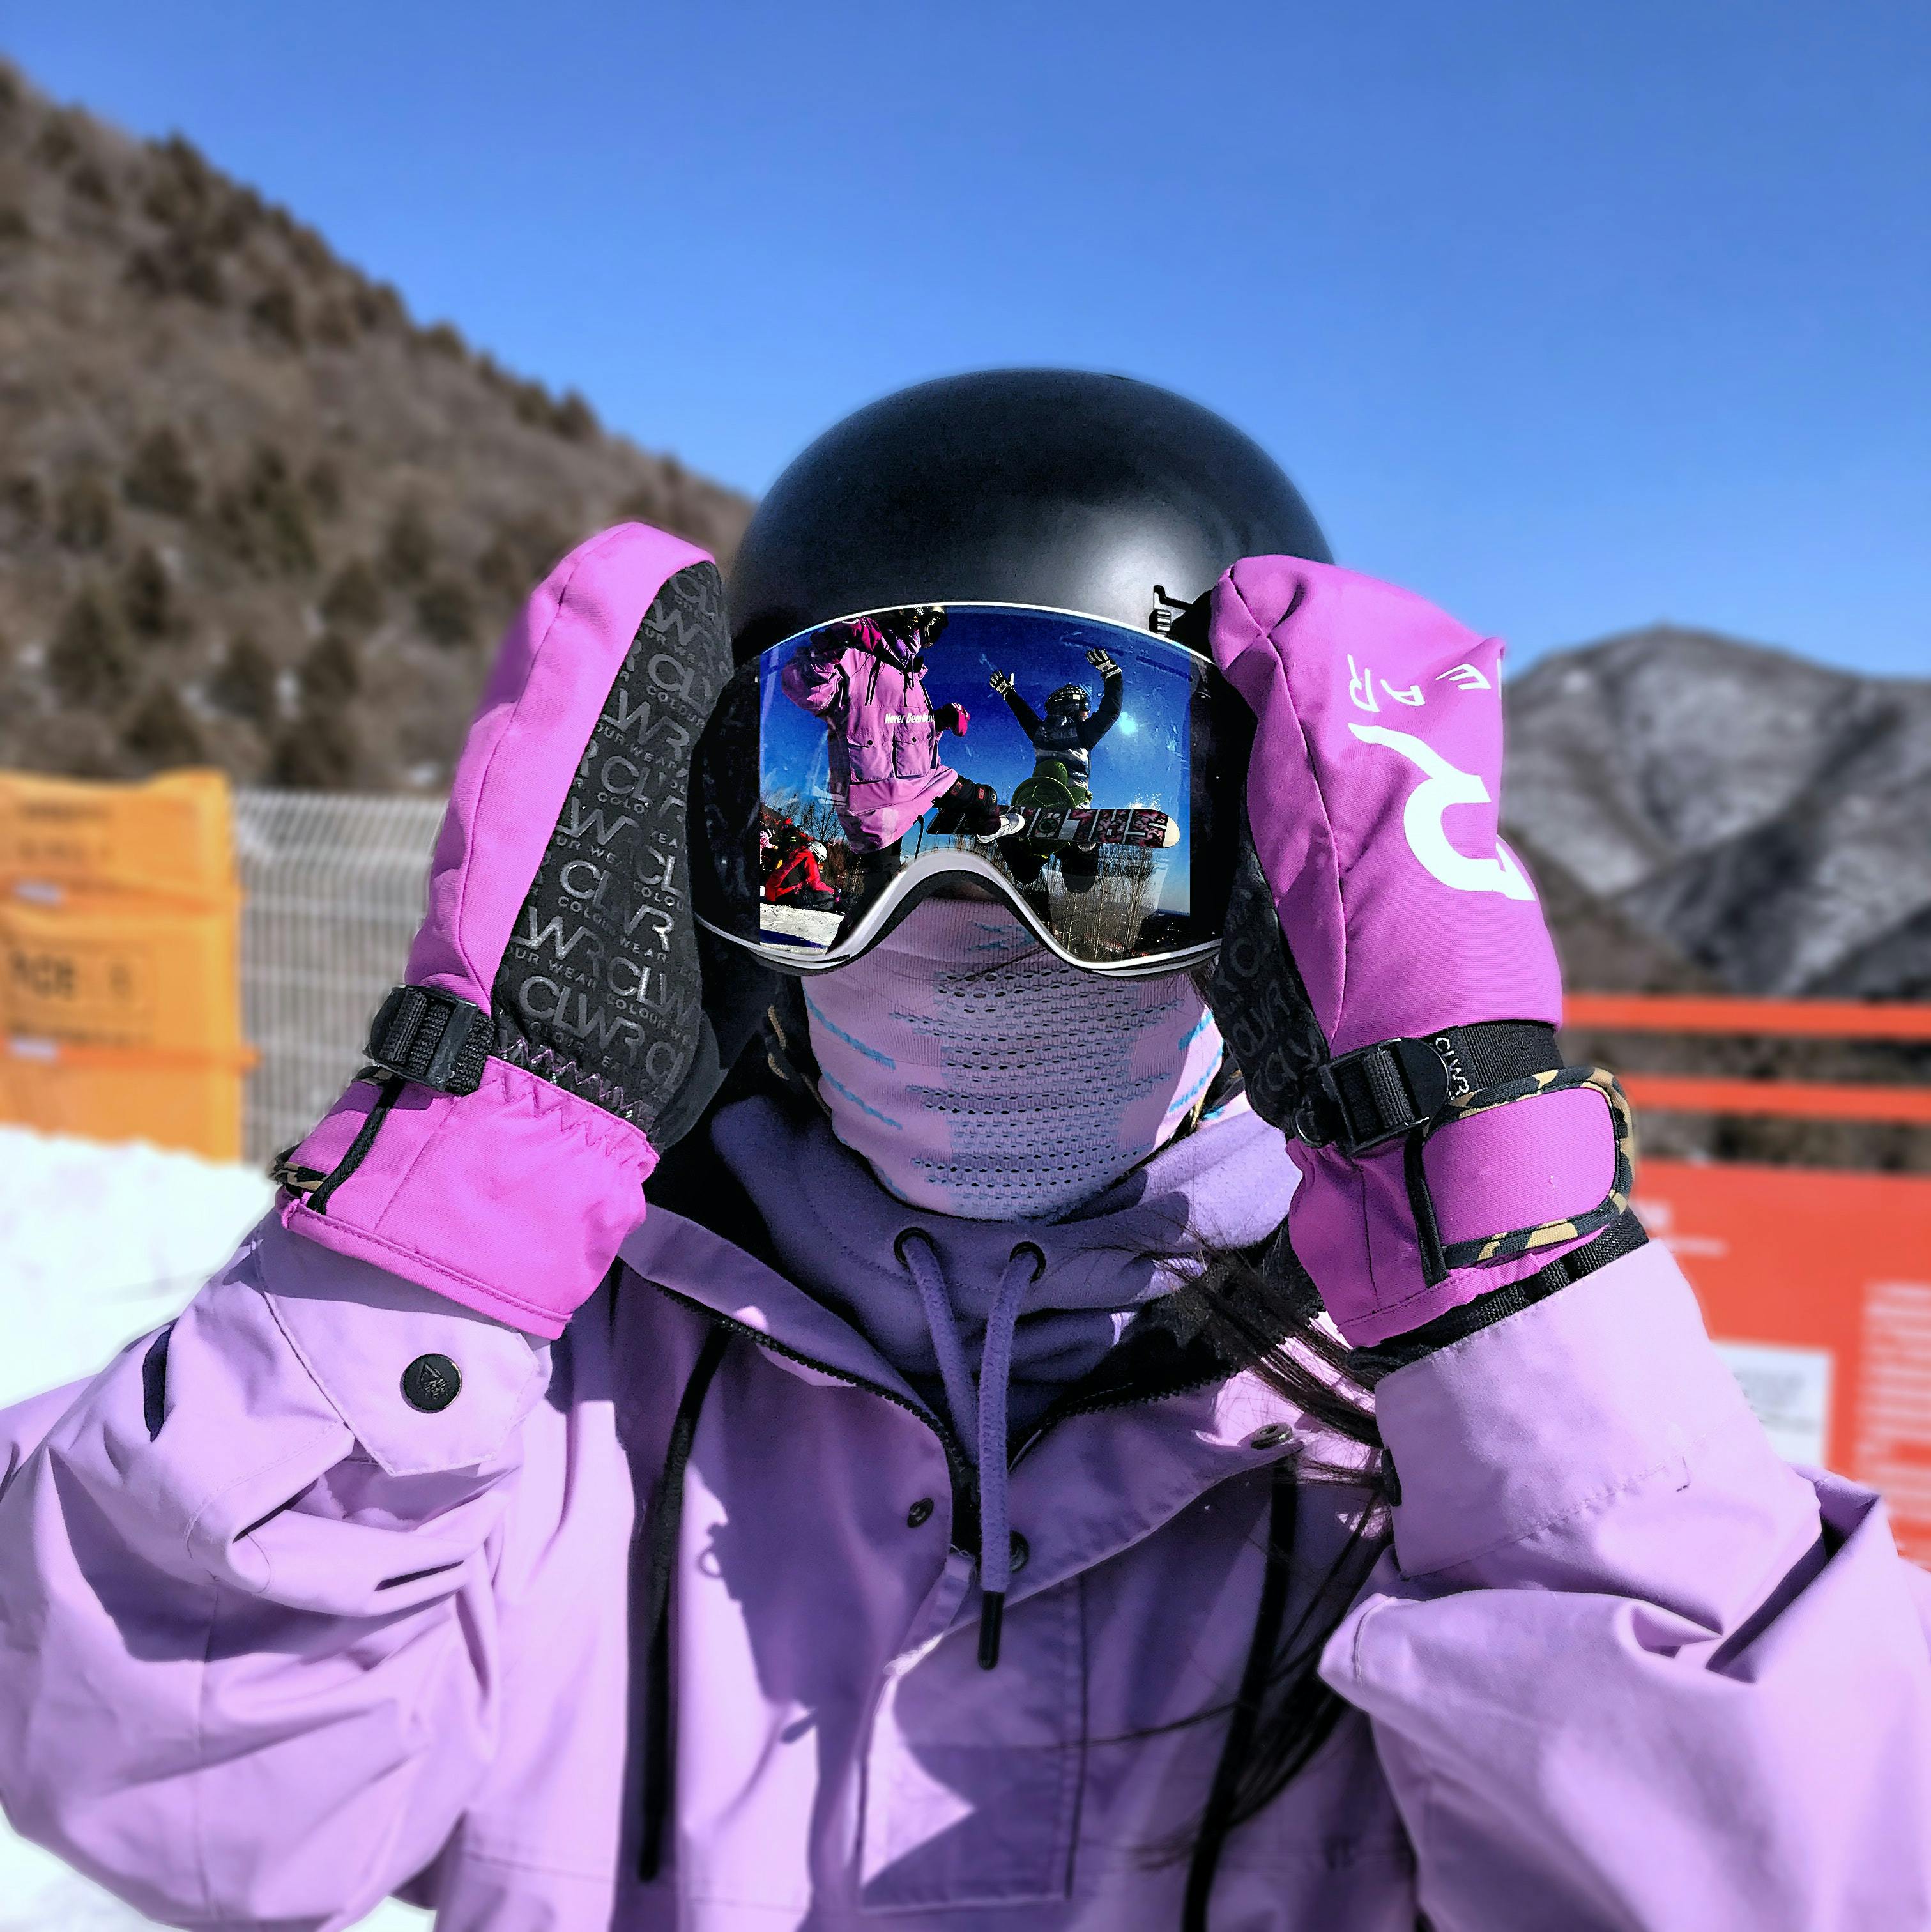 A boarder putting googles on over their helmet on the slope